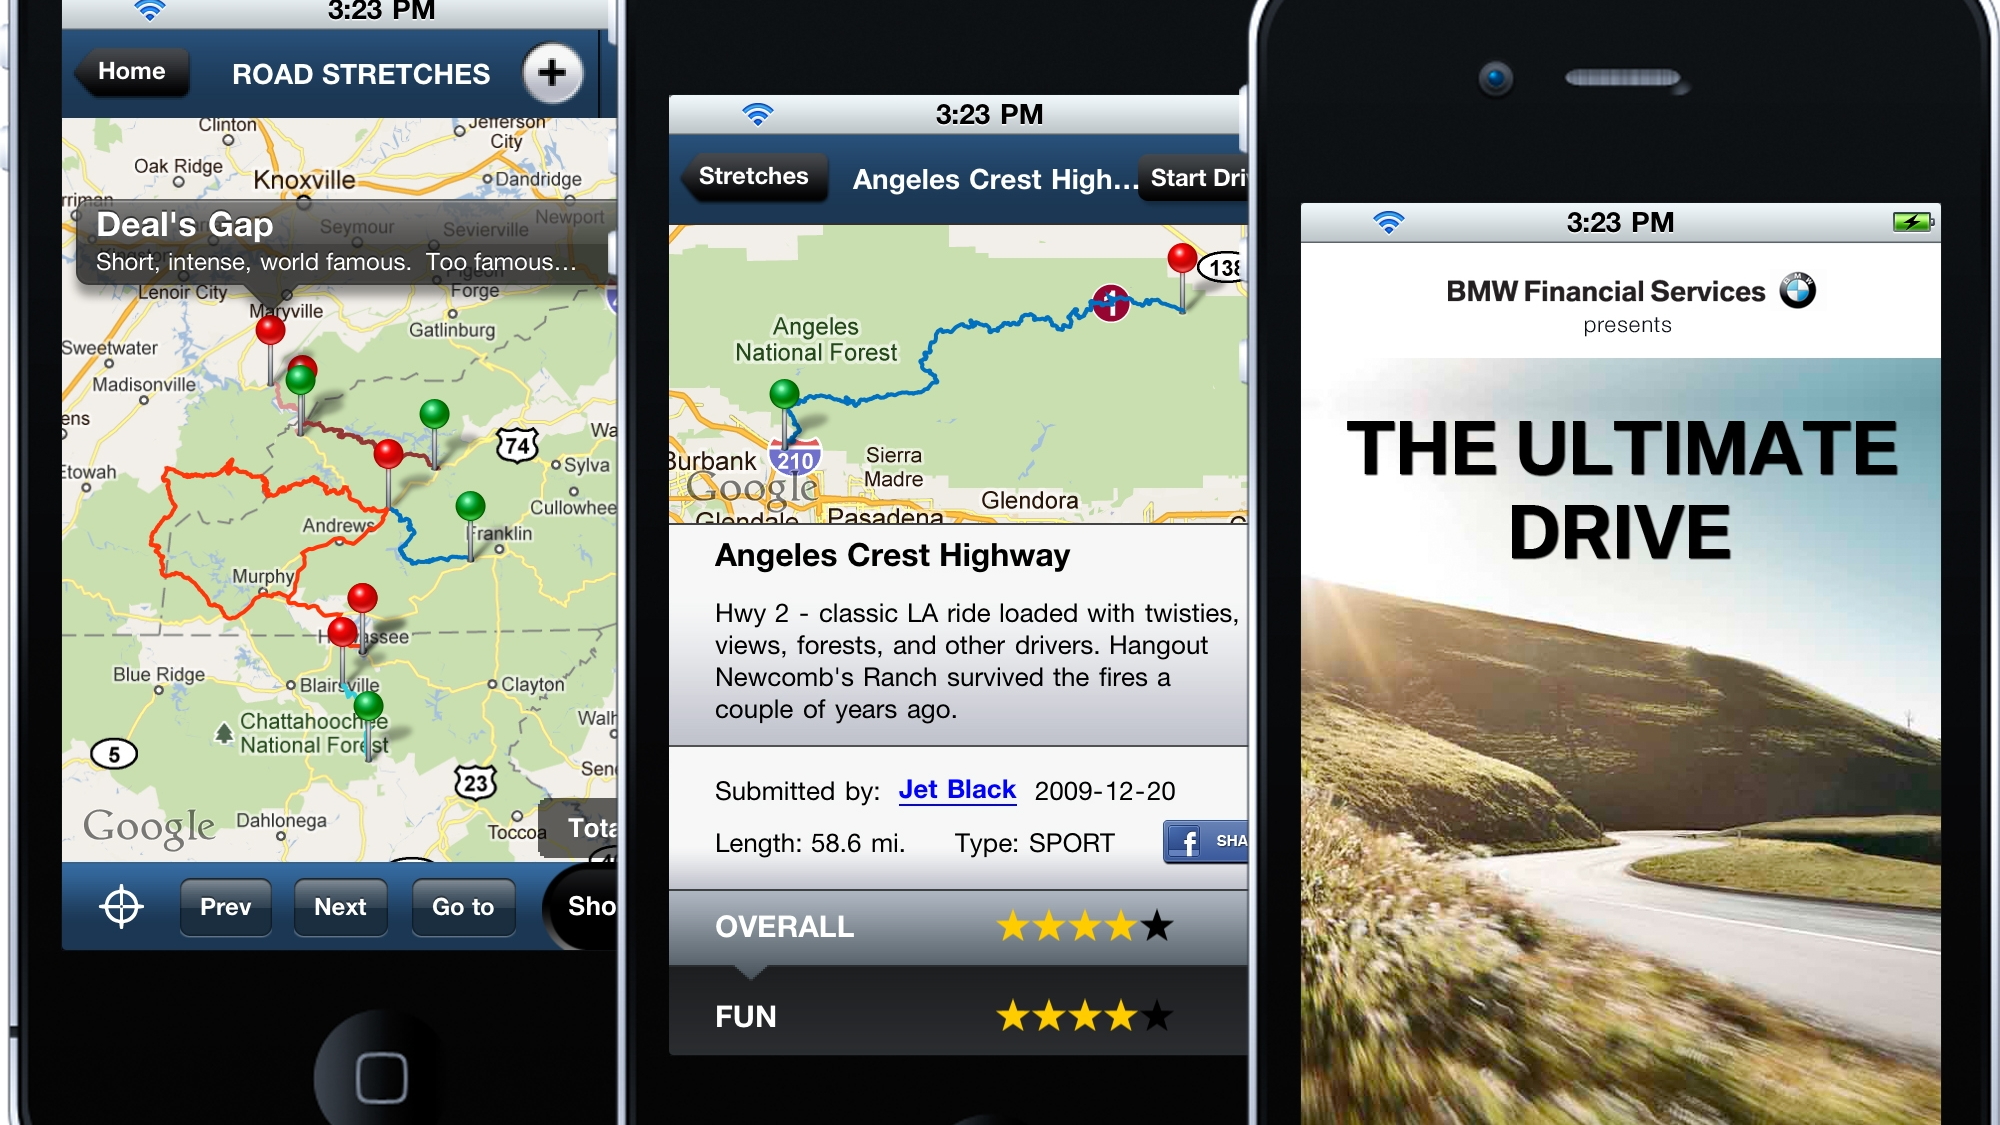 BMW "The Ultimate Drive" app